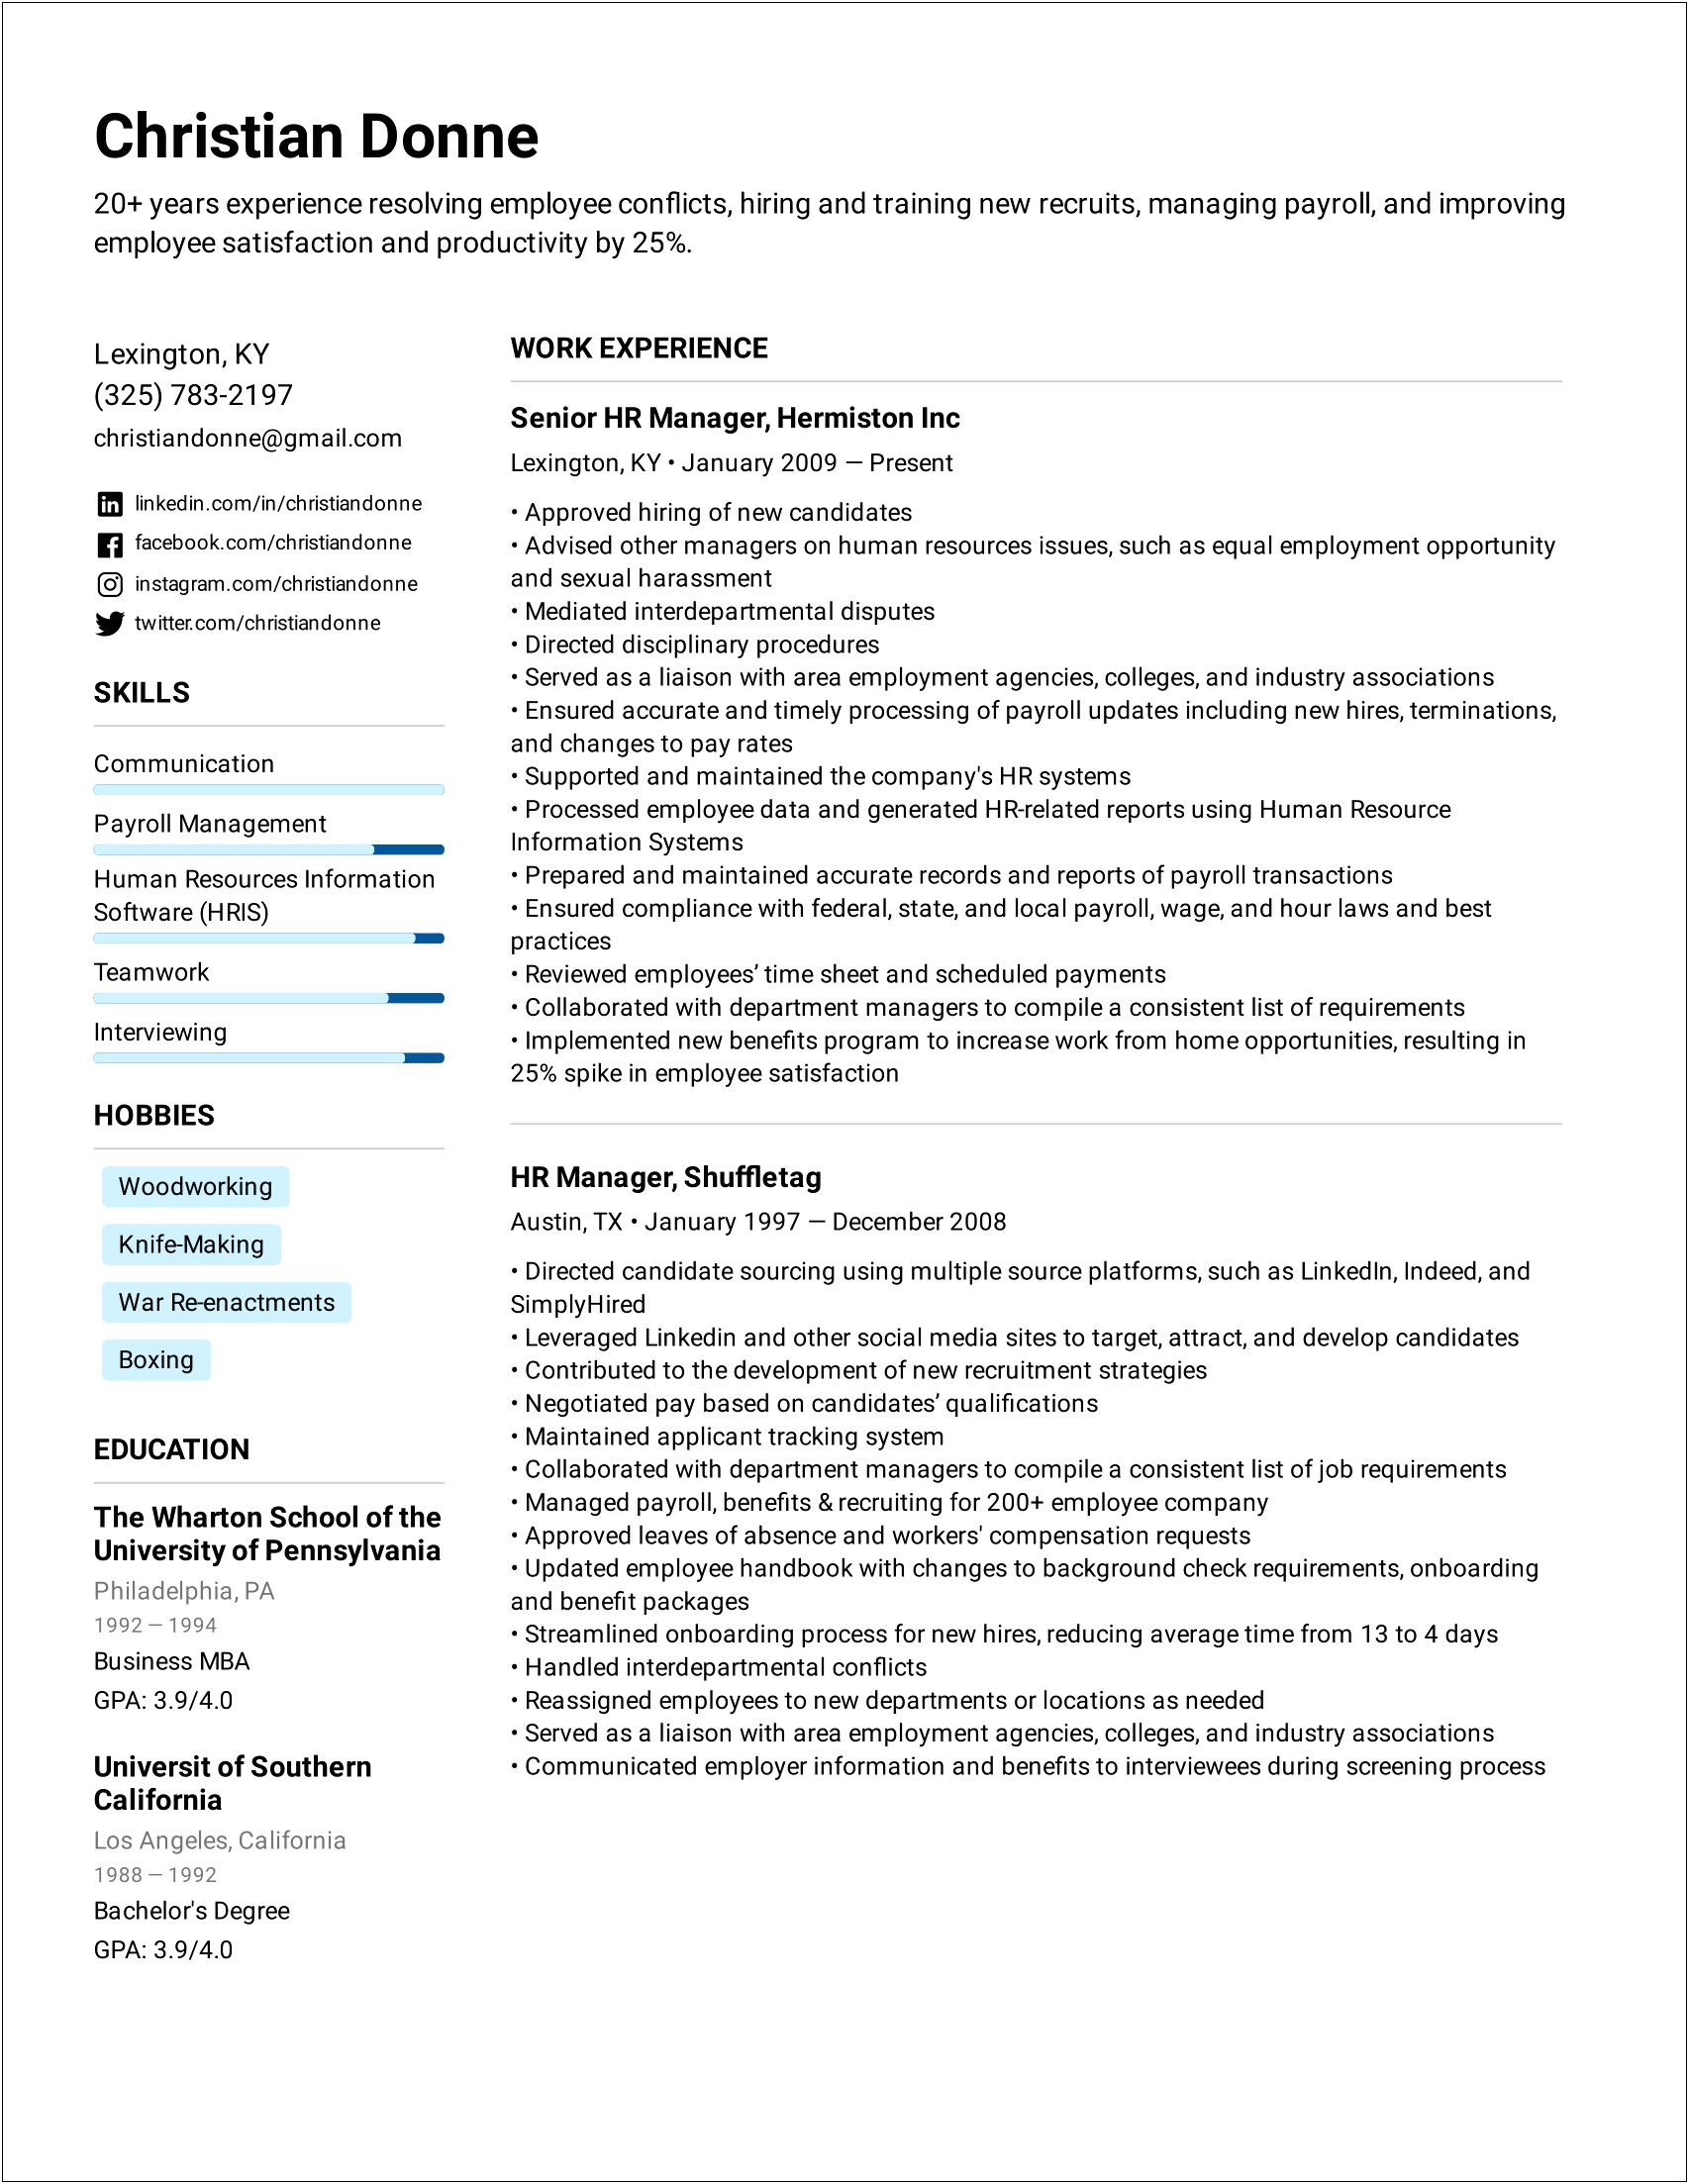 Hris And Payroll Specialist Resume Example